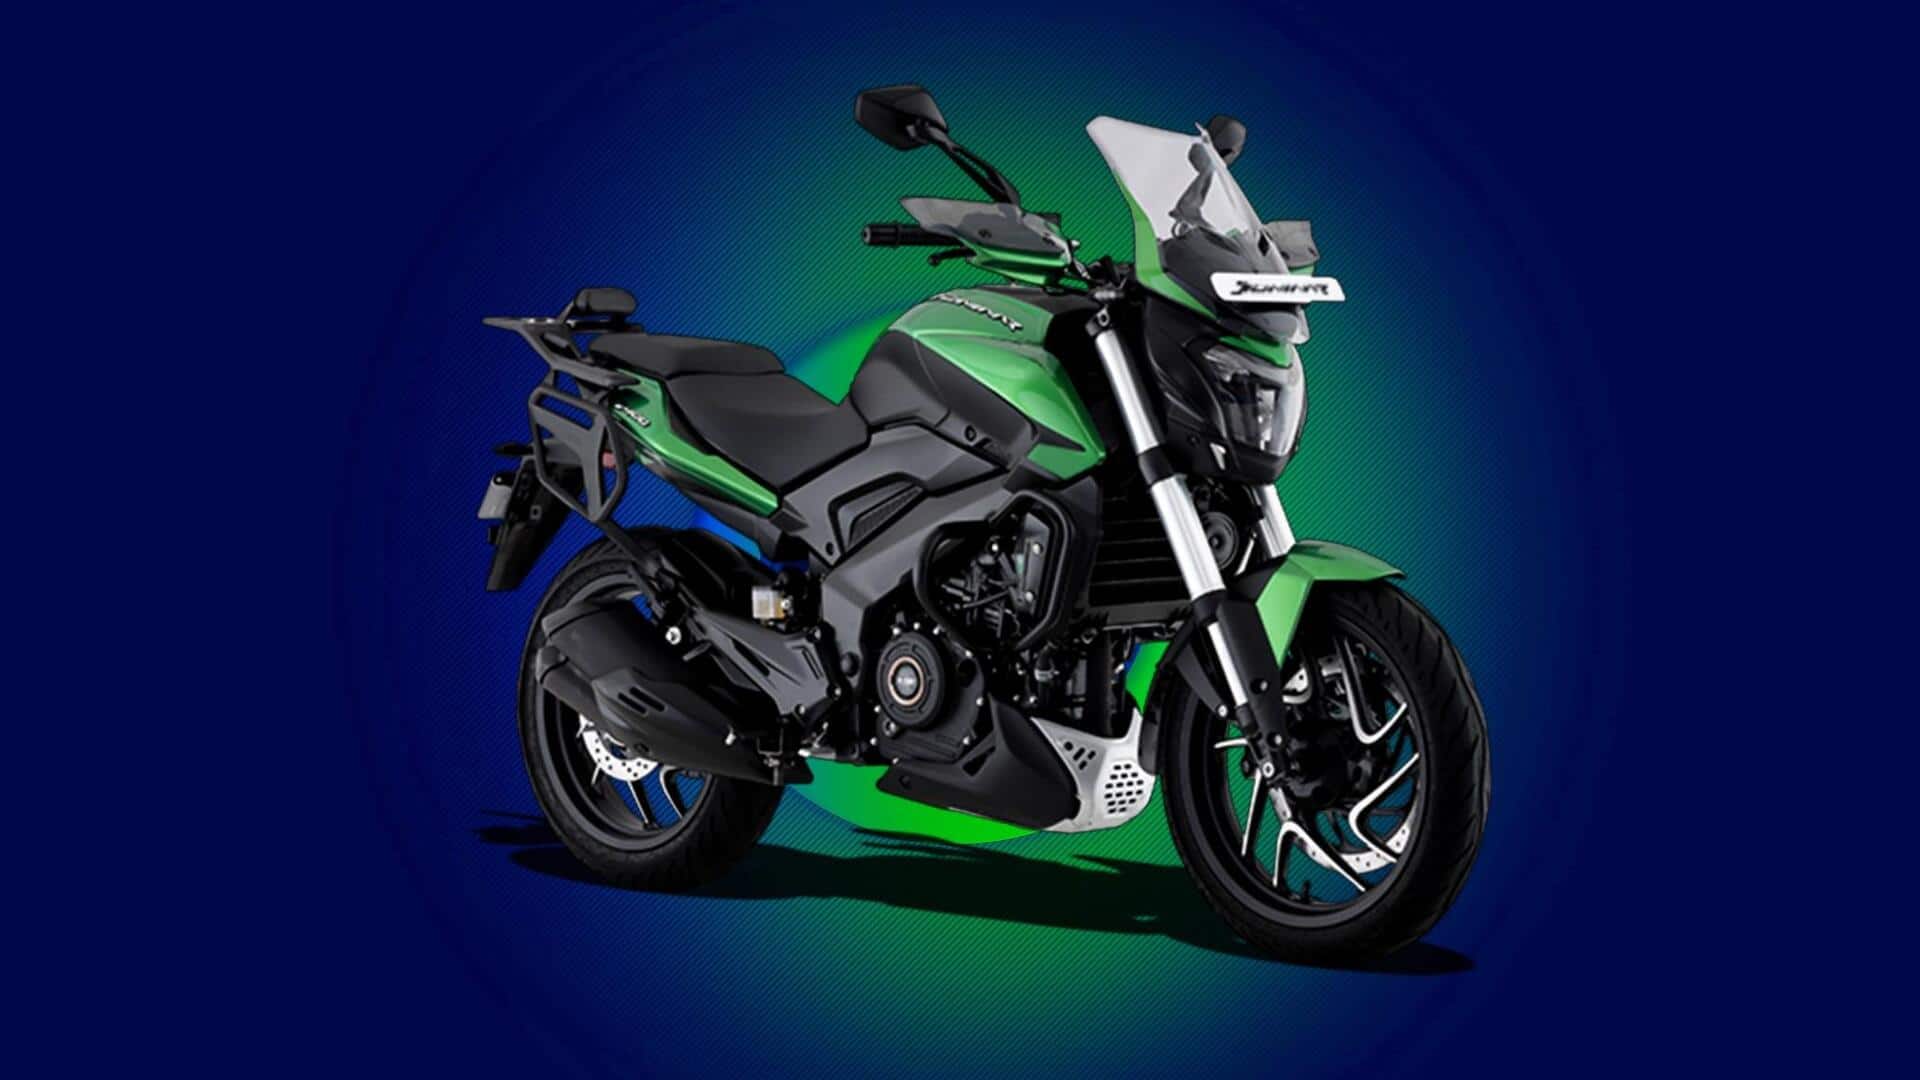 Bajaj Auto to launch CNG-powered motorcycles in India 